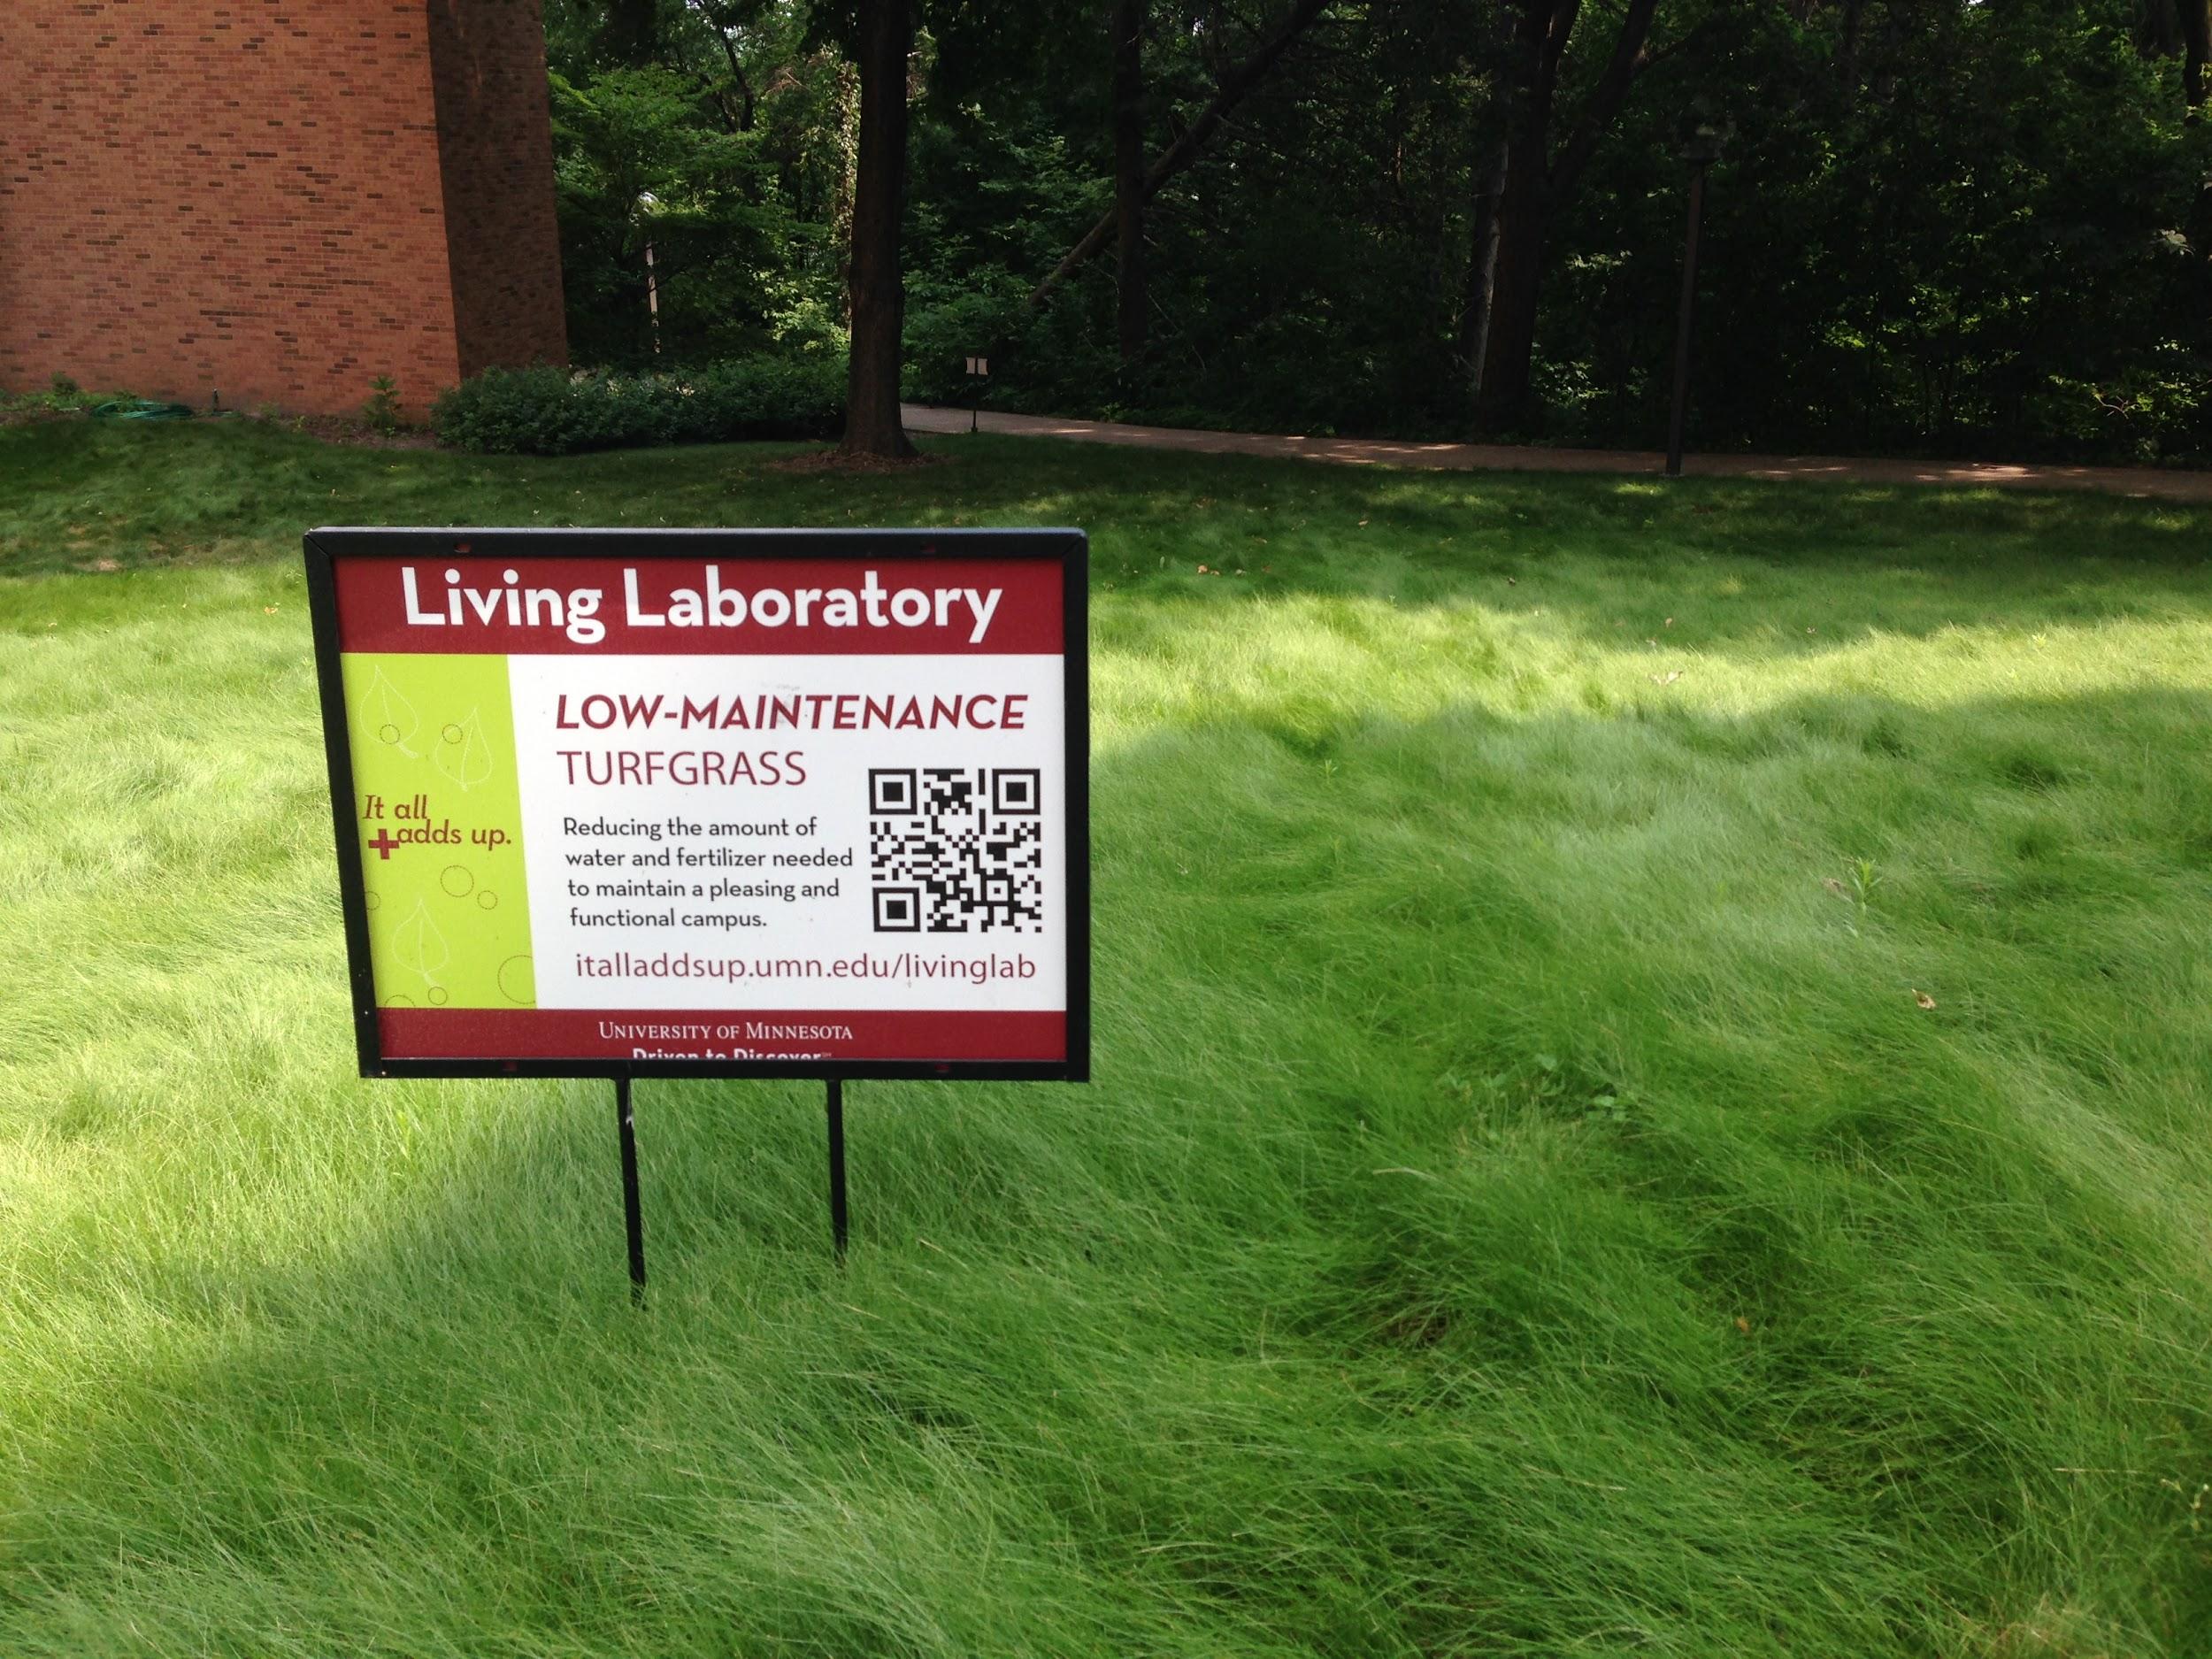 A low-maintenance fine fescue demonstration at the University of Minnesota.